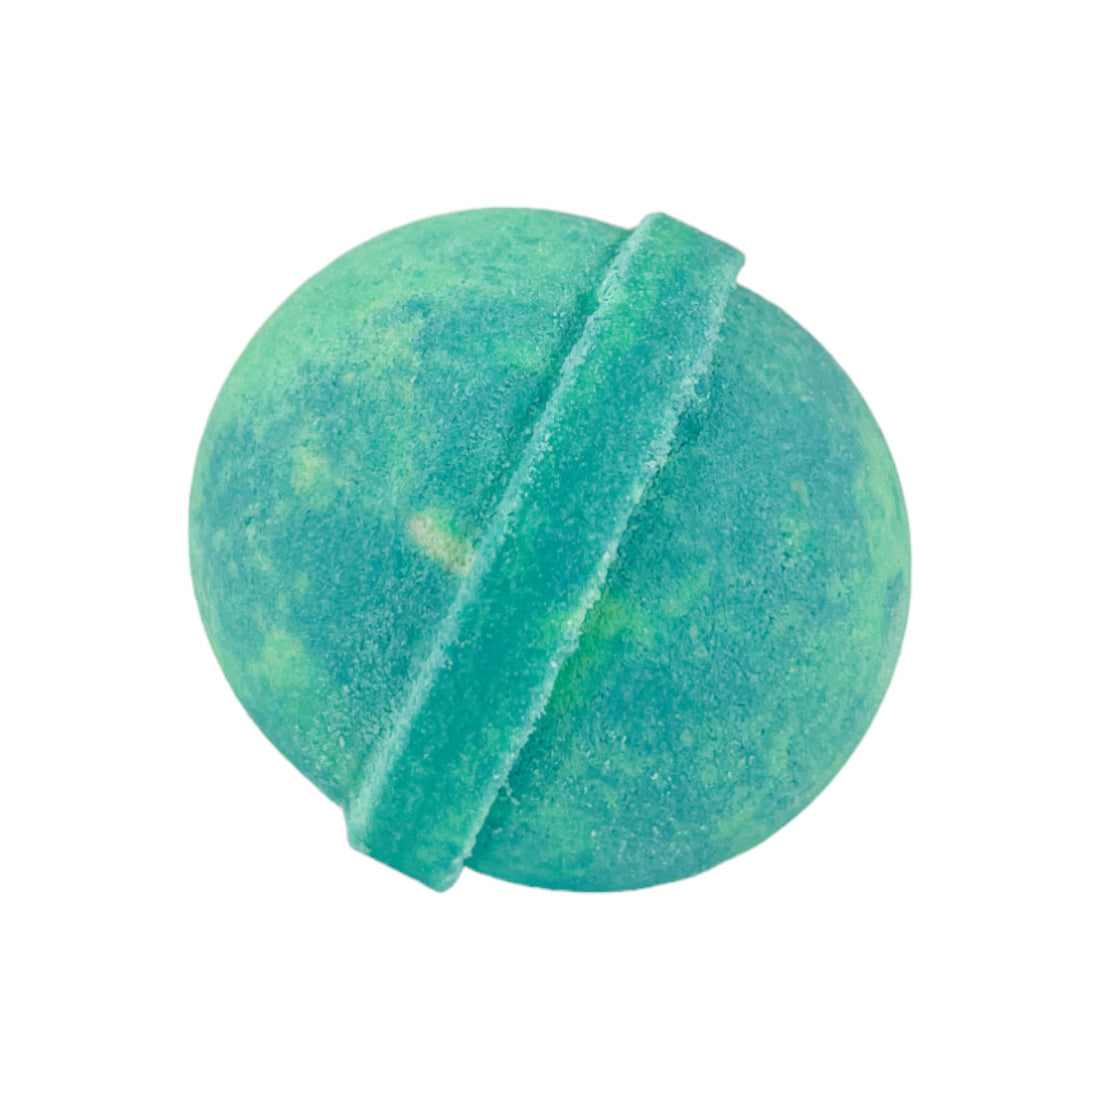 Sea Glass Bath Bomb -Large - Old Town Soap Co.